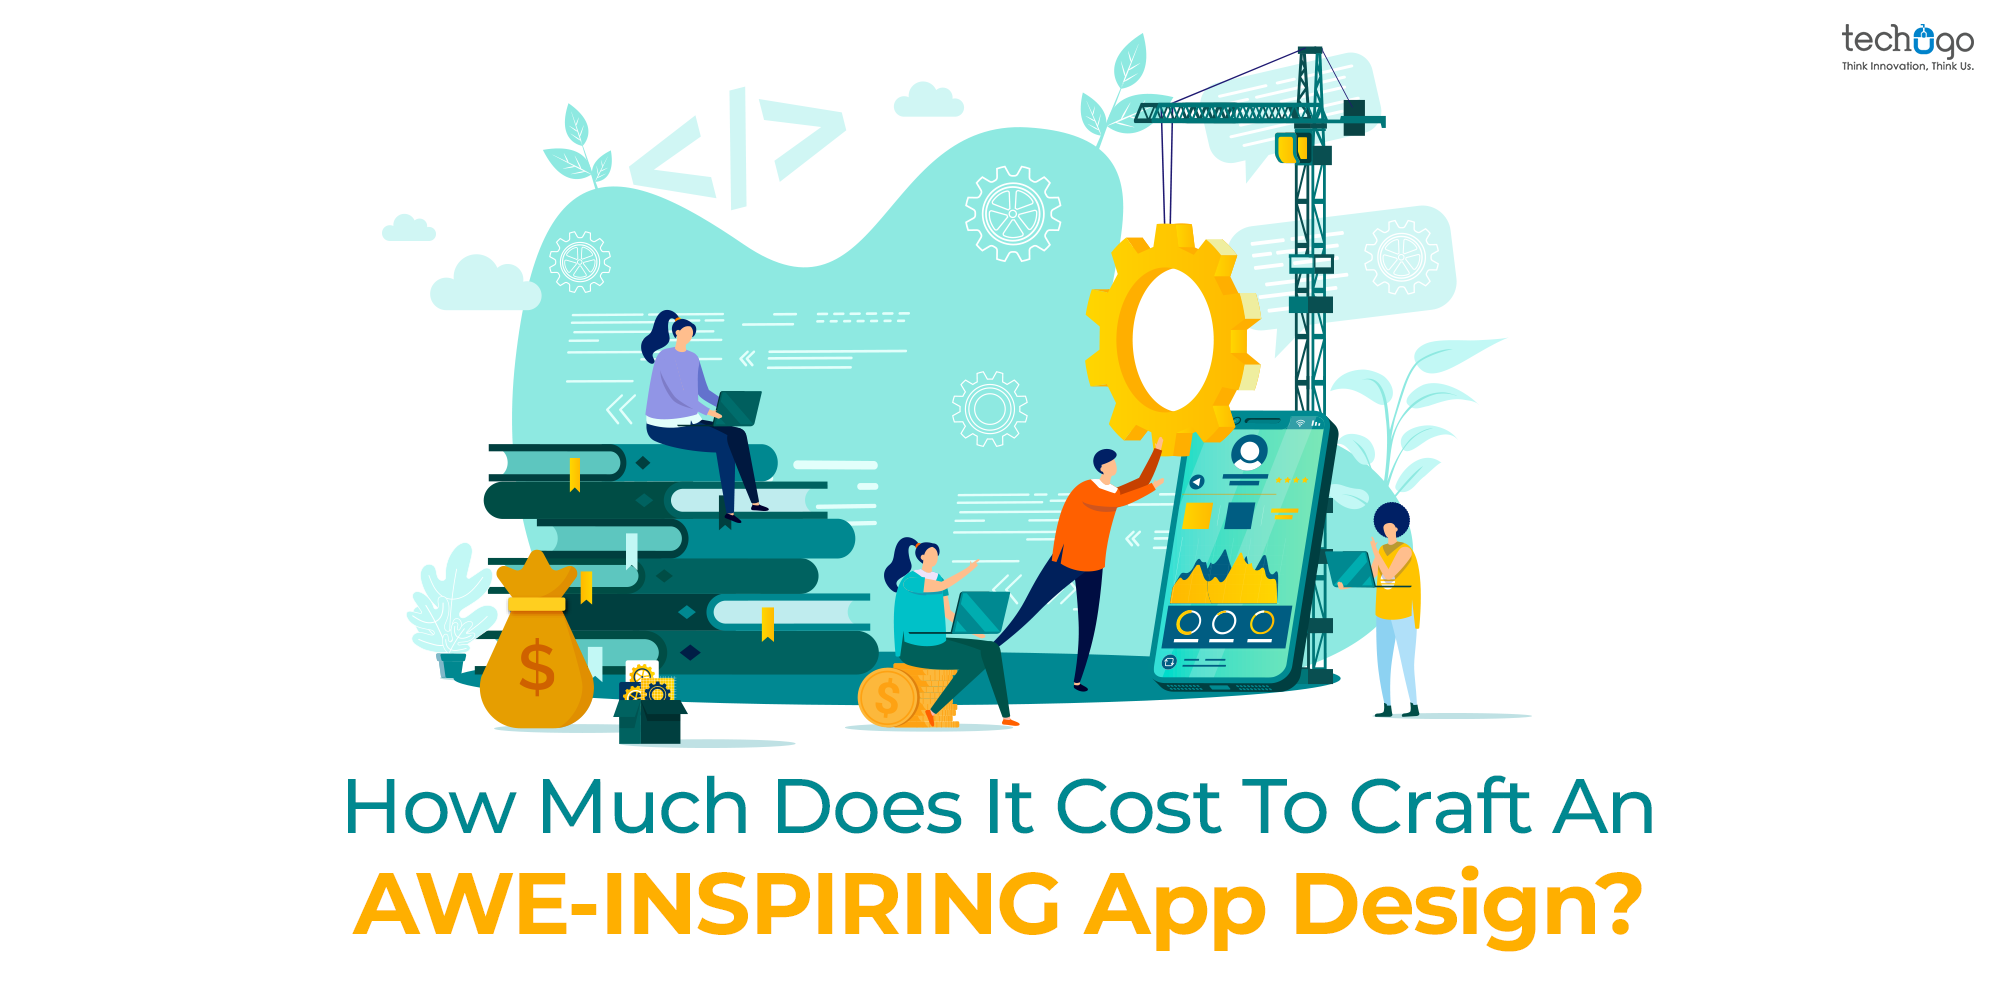 How Much Does It Cost To Craft An Awe-Inspiring App Design?